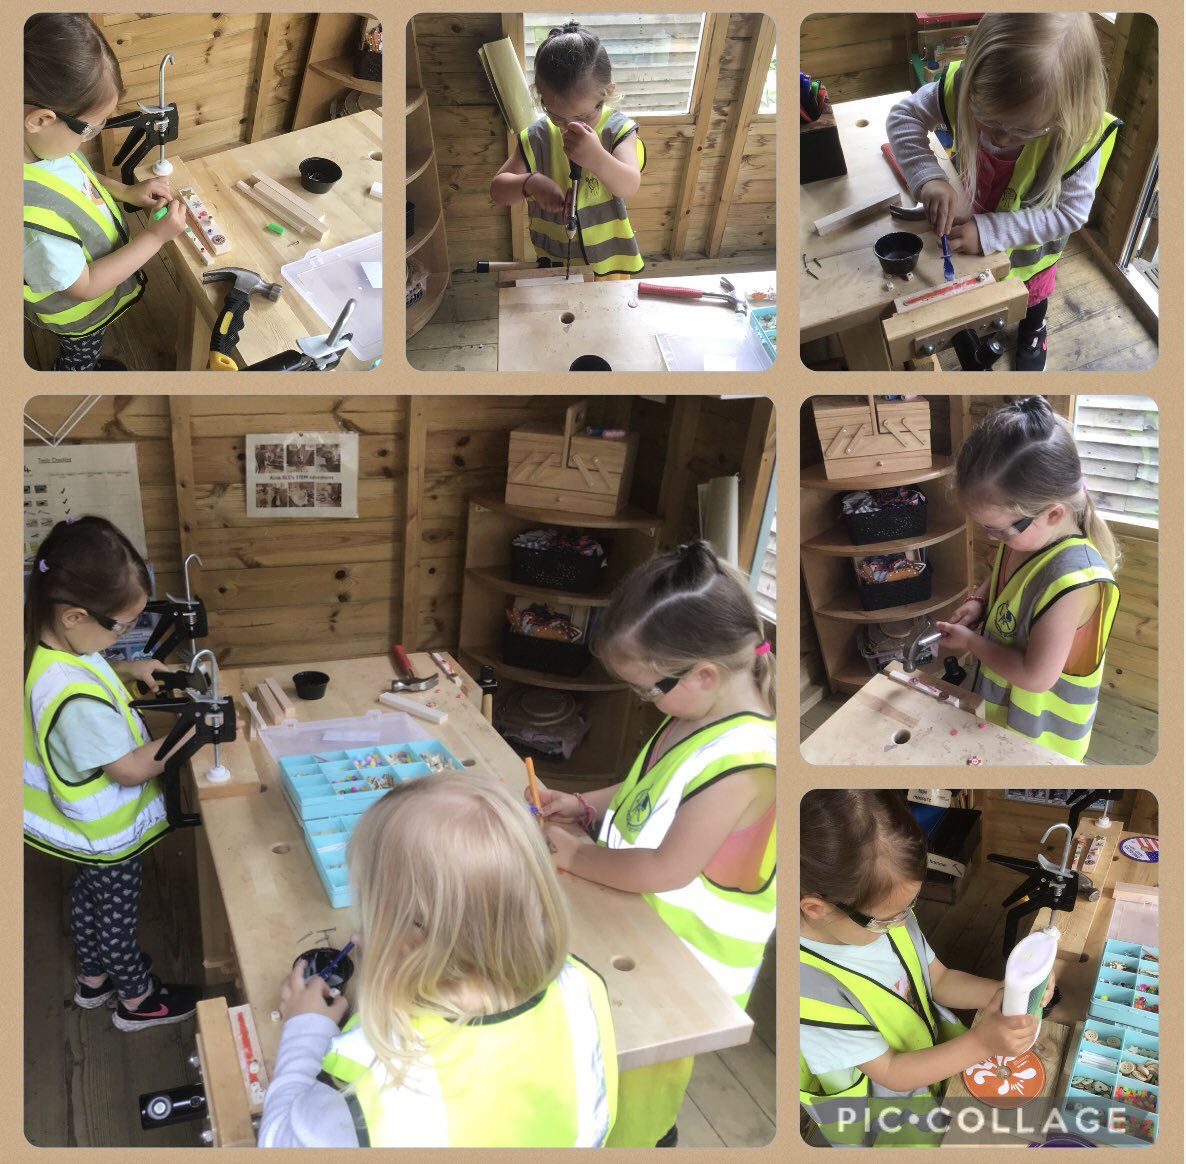 Lots of creations in our stem shed using real tools. We are so good at following our safety rules and risk assessing during our experience. “Look at my sword,” “I’m making a phone stand for my mum.” #realtools @airthprimary